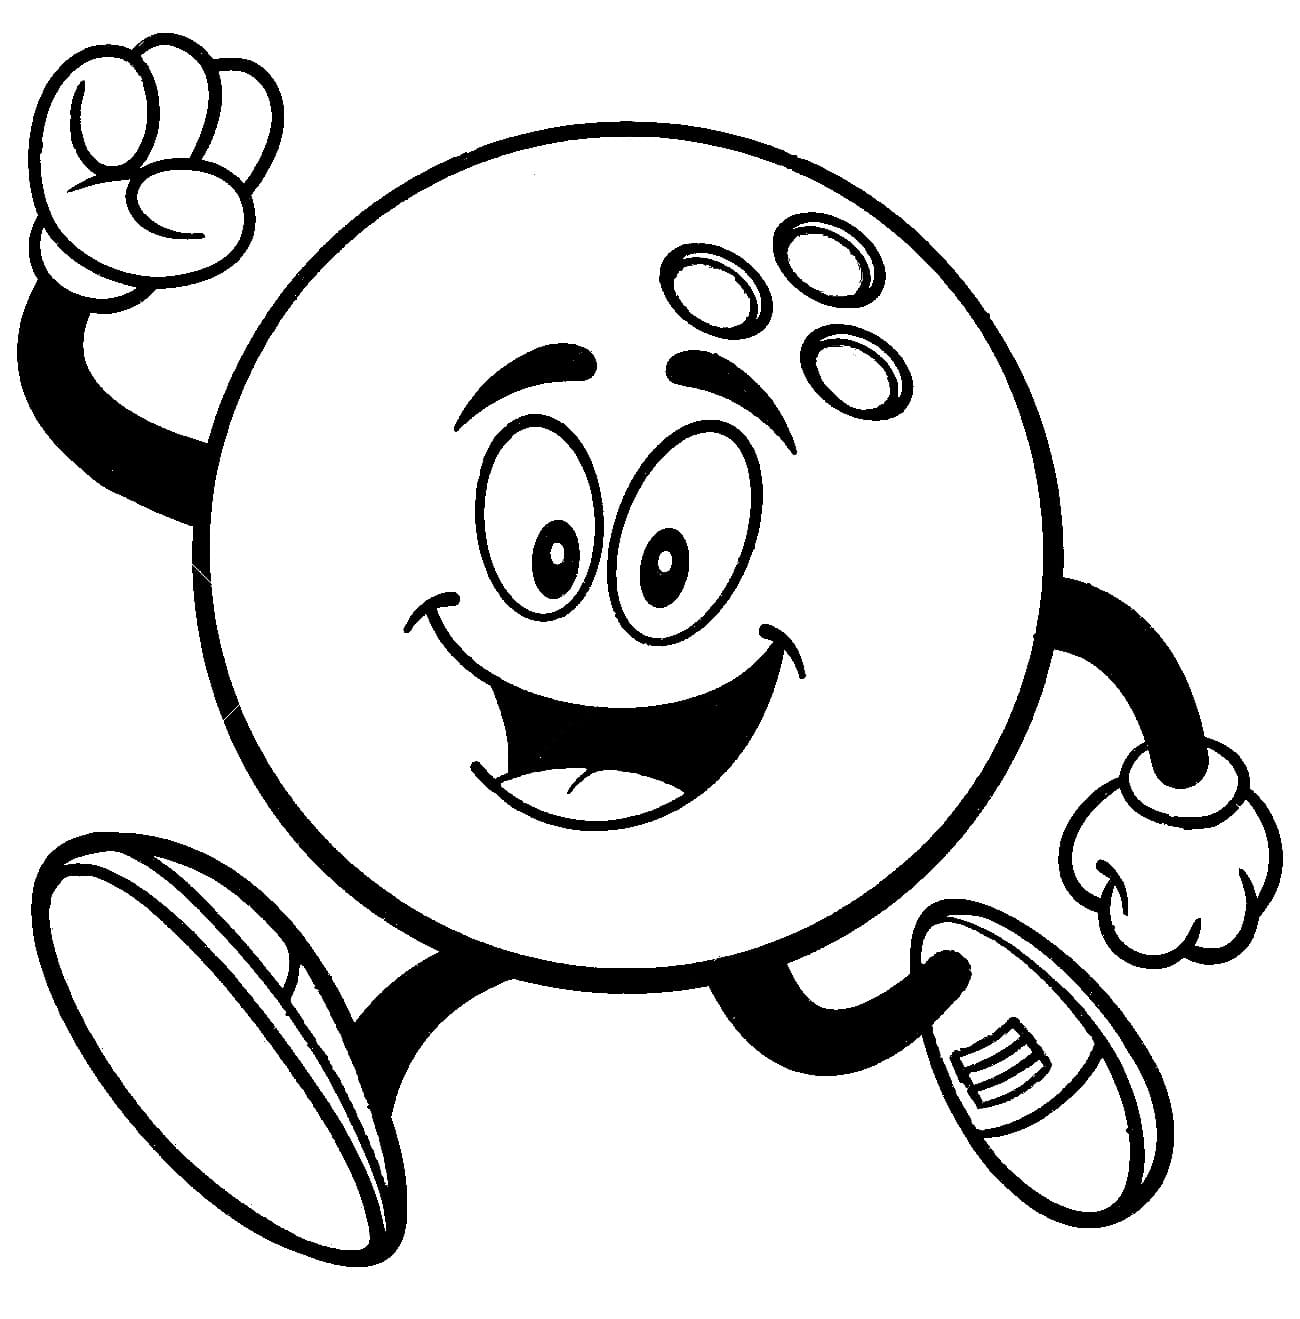 Cartoon Bowling Ball coloring page - Download, Print or Color Online ...